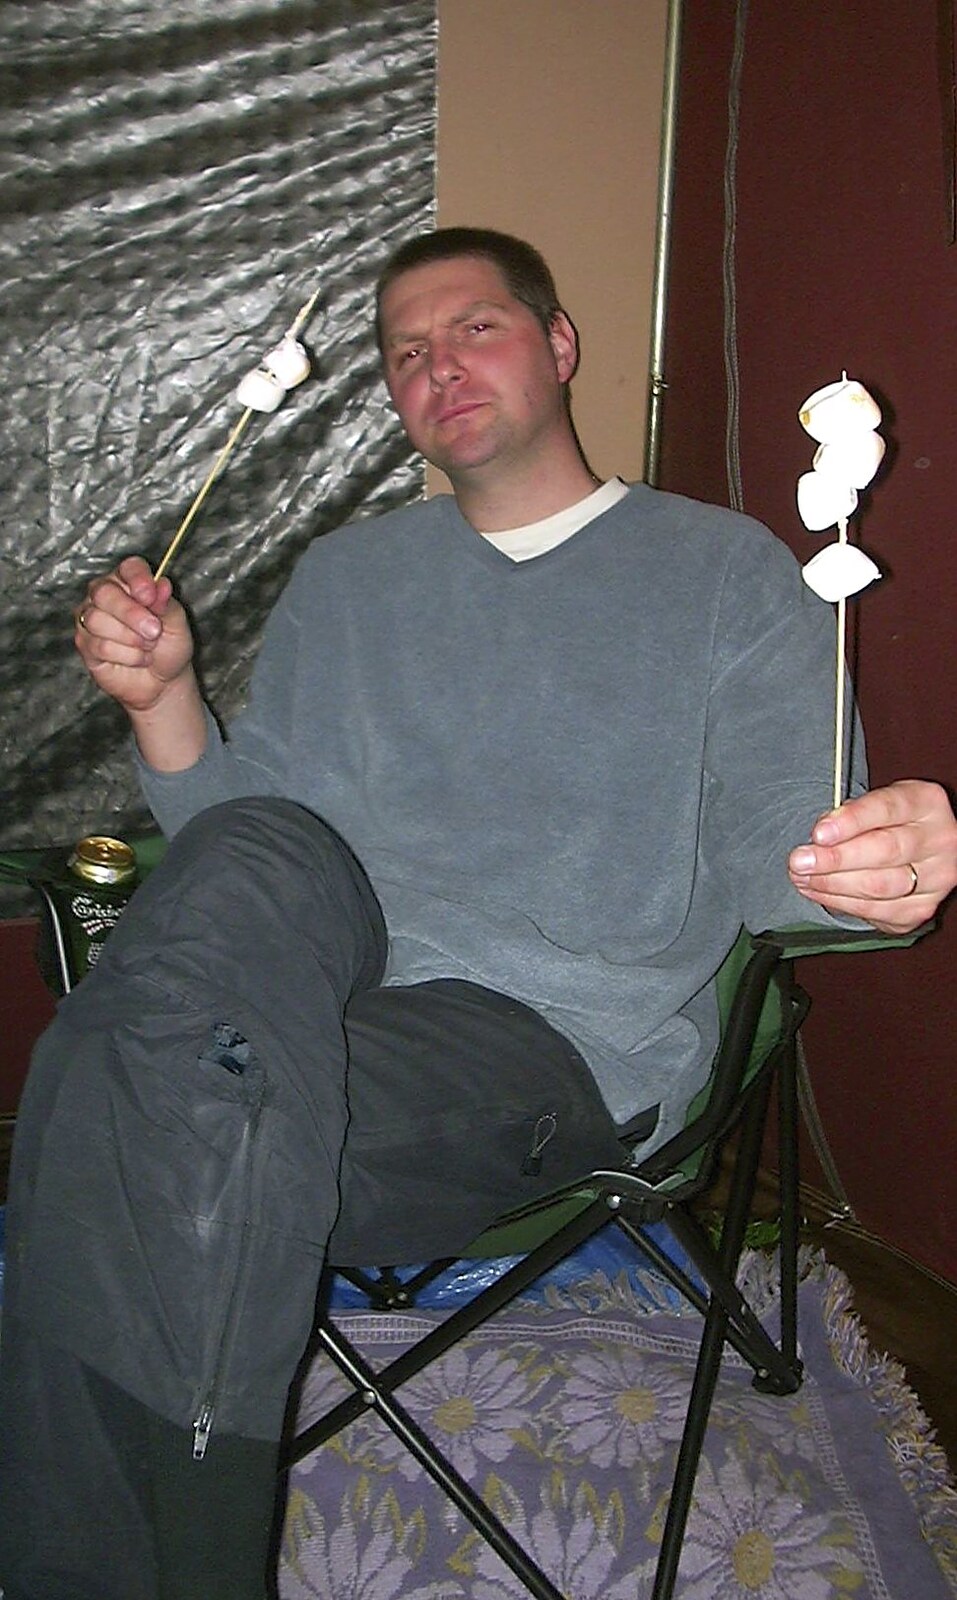 Sean has some sort of marshmallow on a stick from Corfe Castle Camping, Corfe, Dorset - 30th May 2004